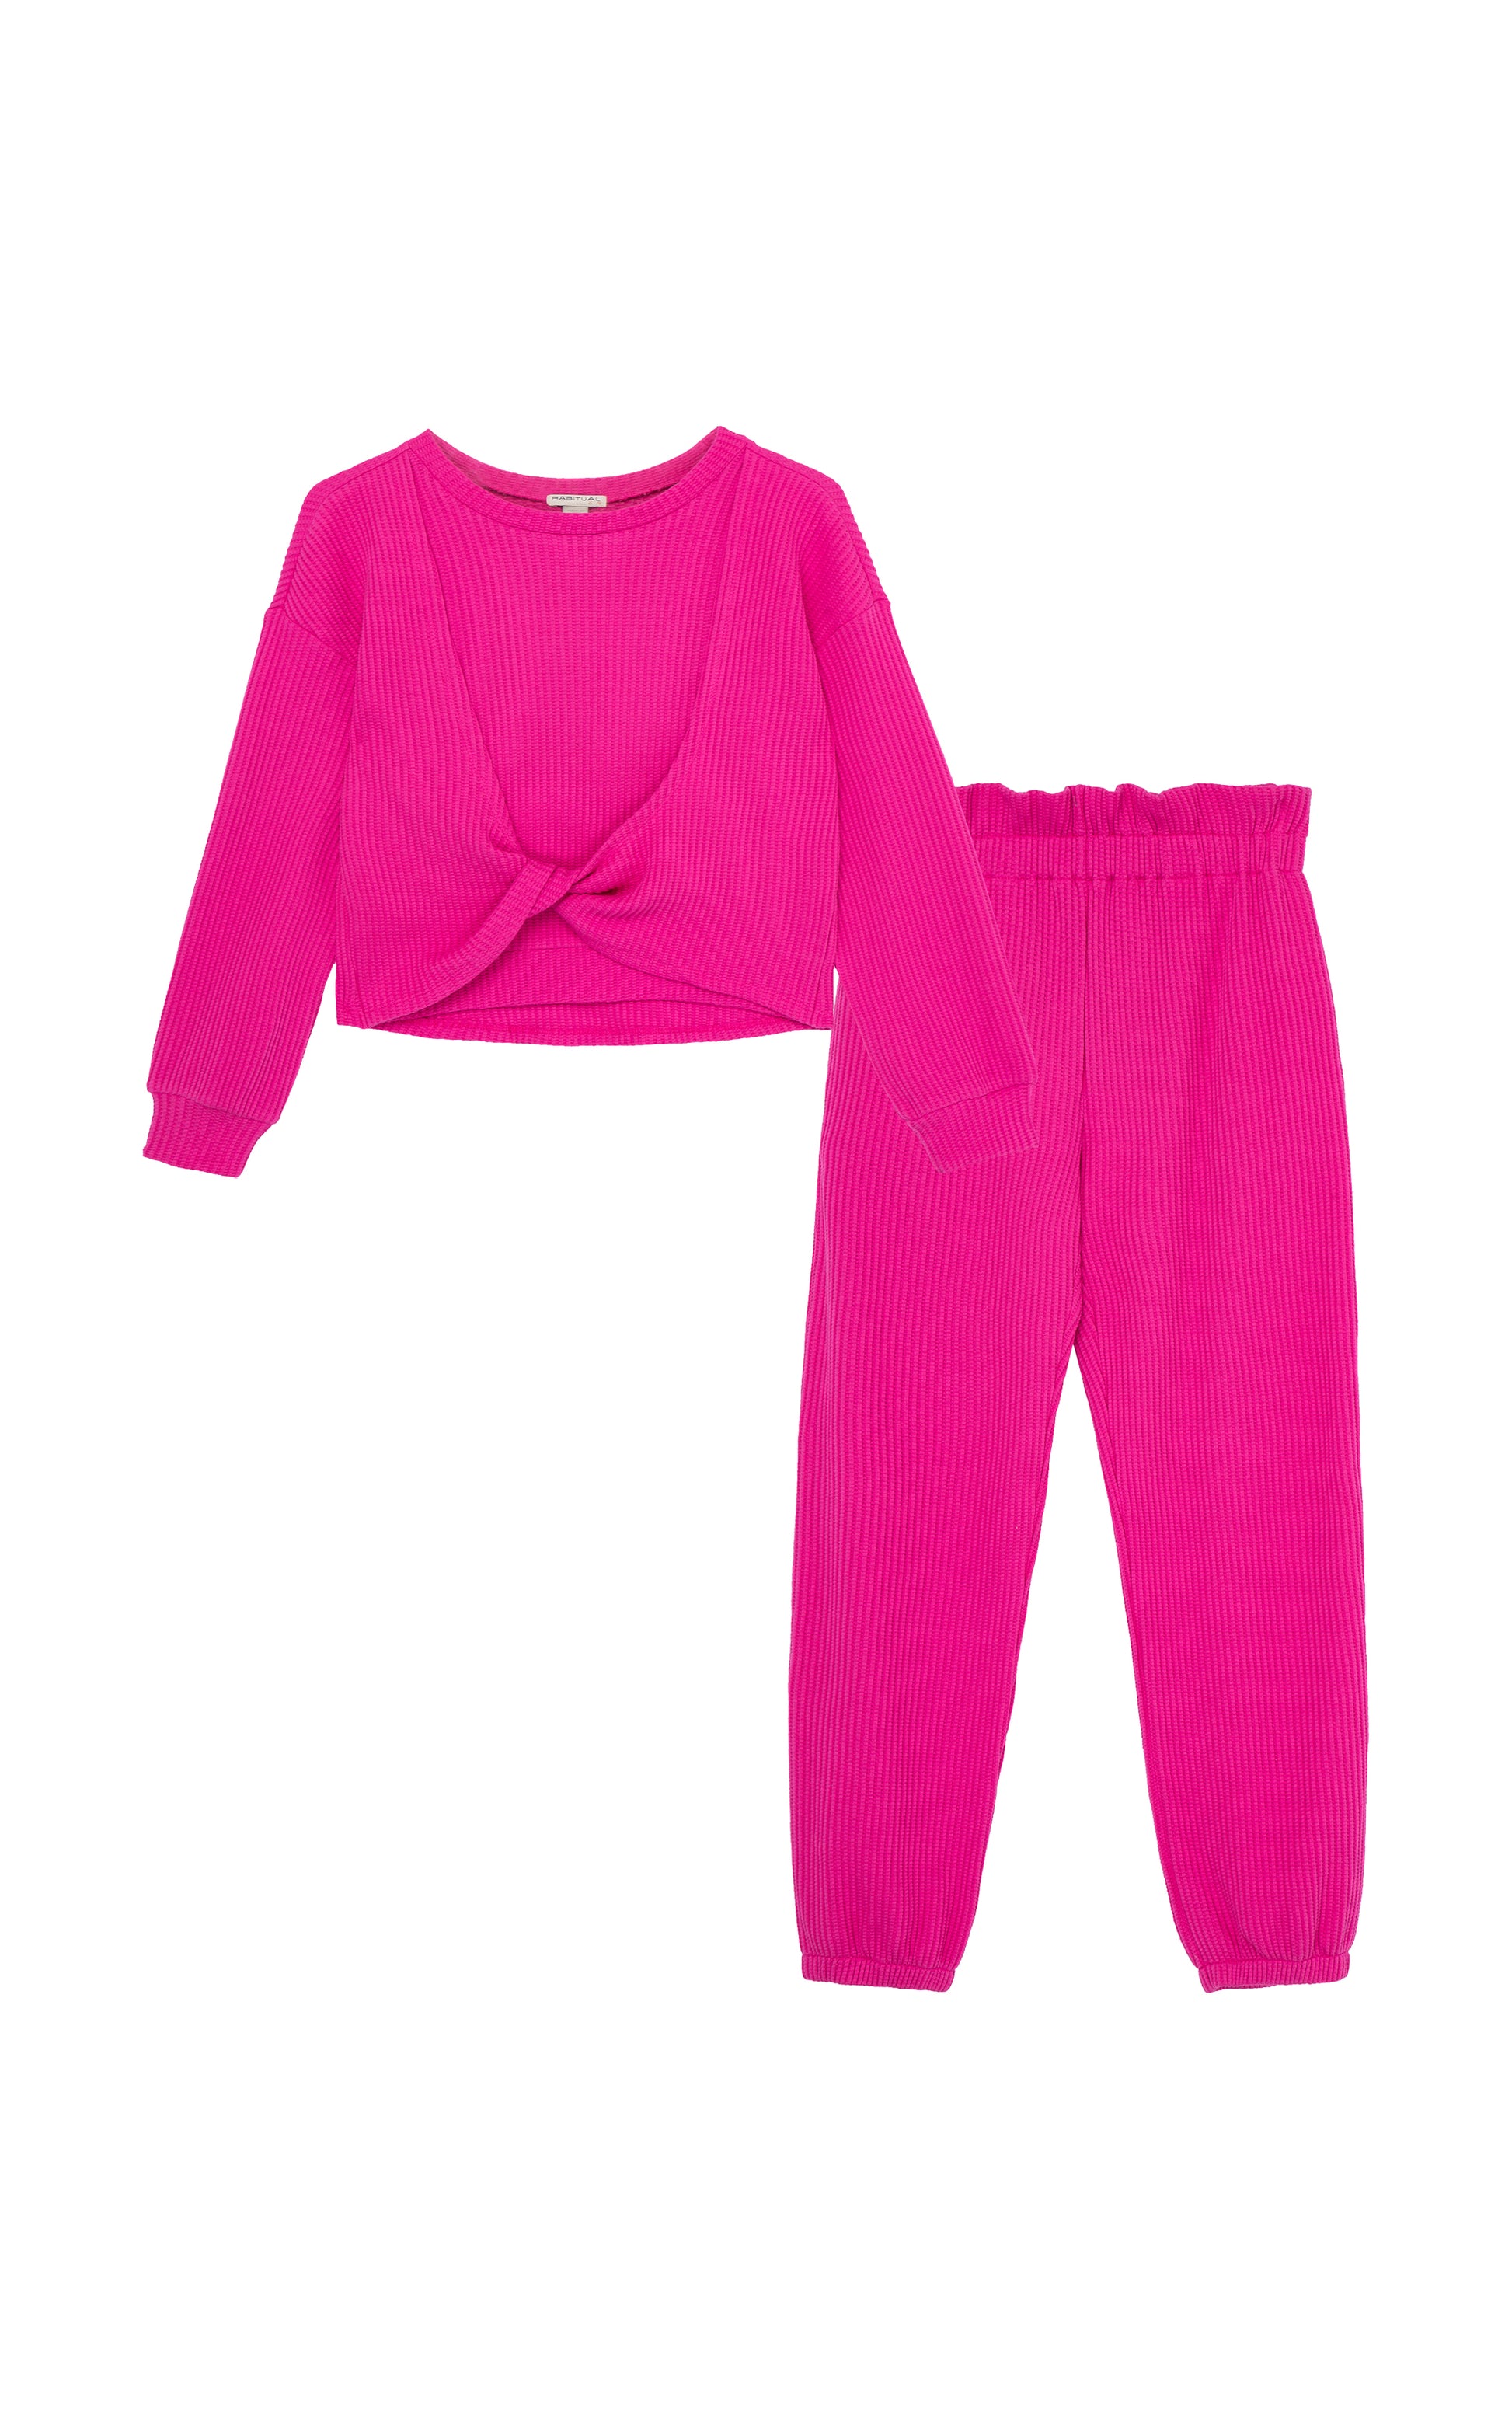 MAGENTA WAFFLE KNIT SWEATER WITH KNOT TWIST IN FRONT AND MATCHING SWEATPANTS